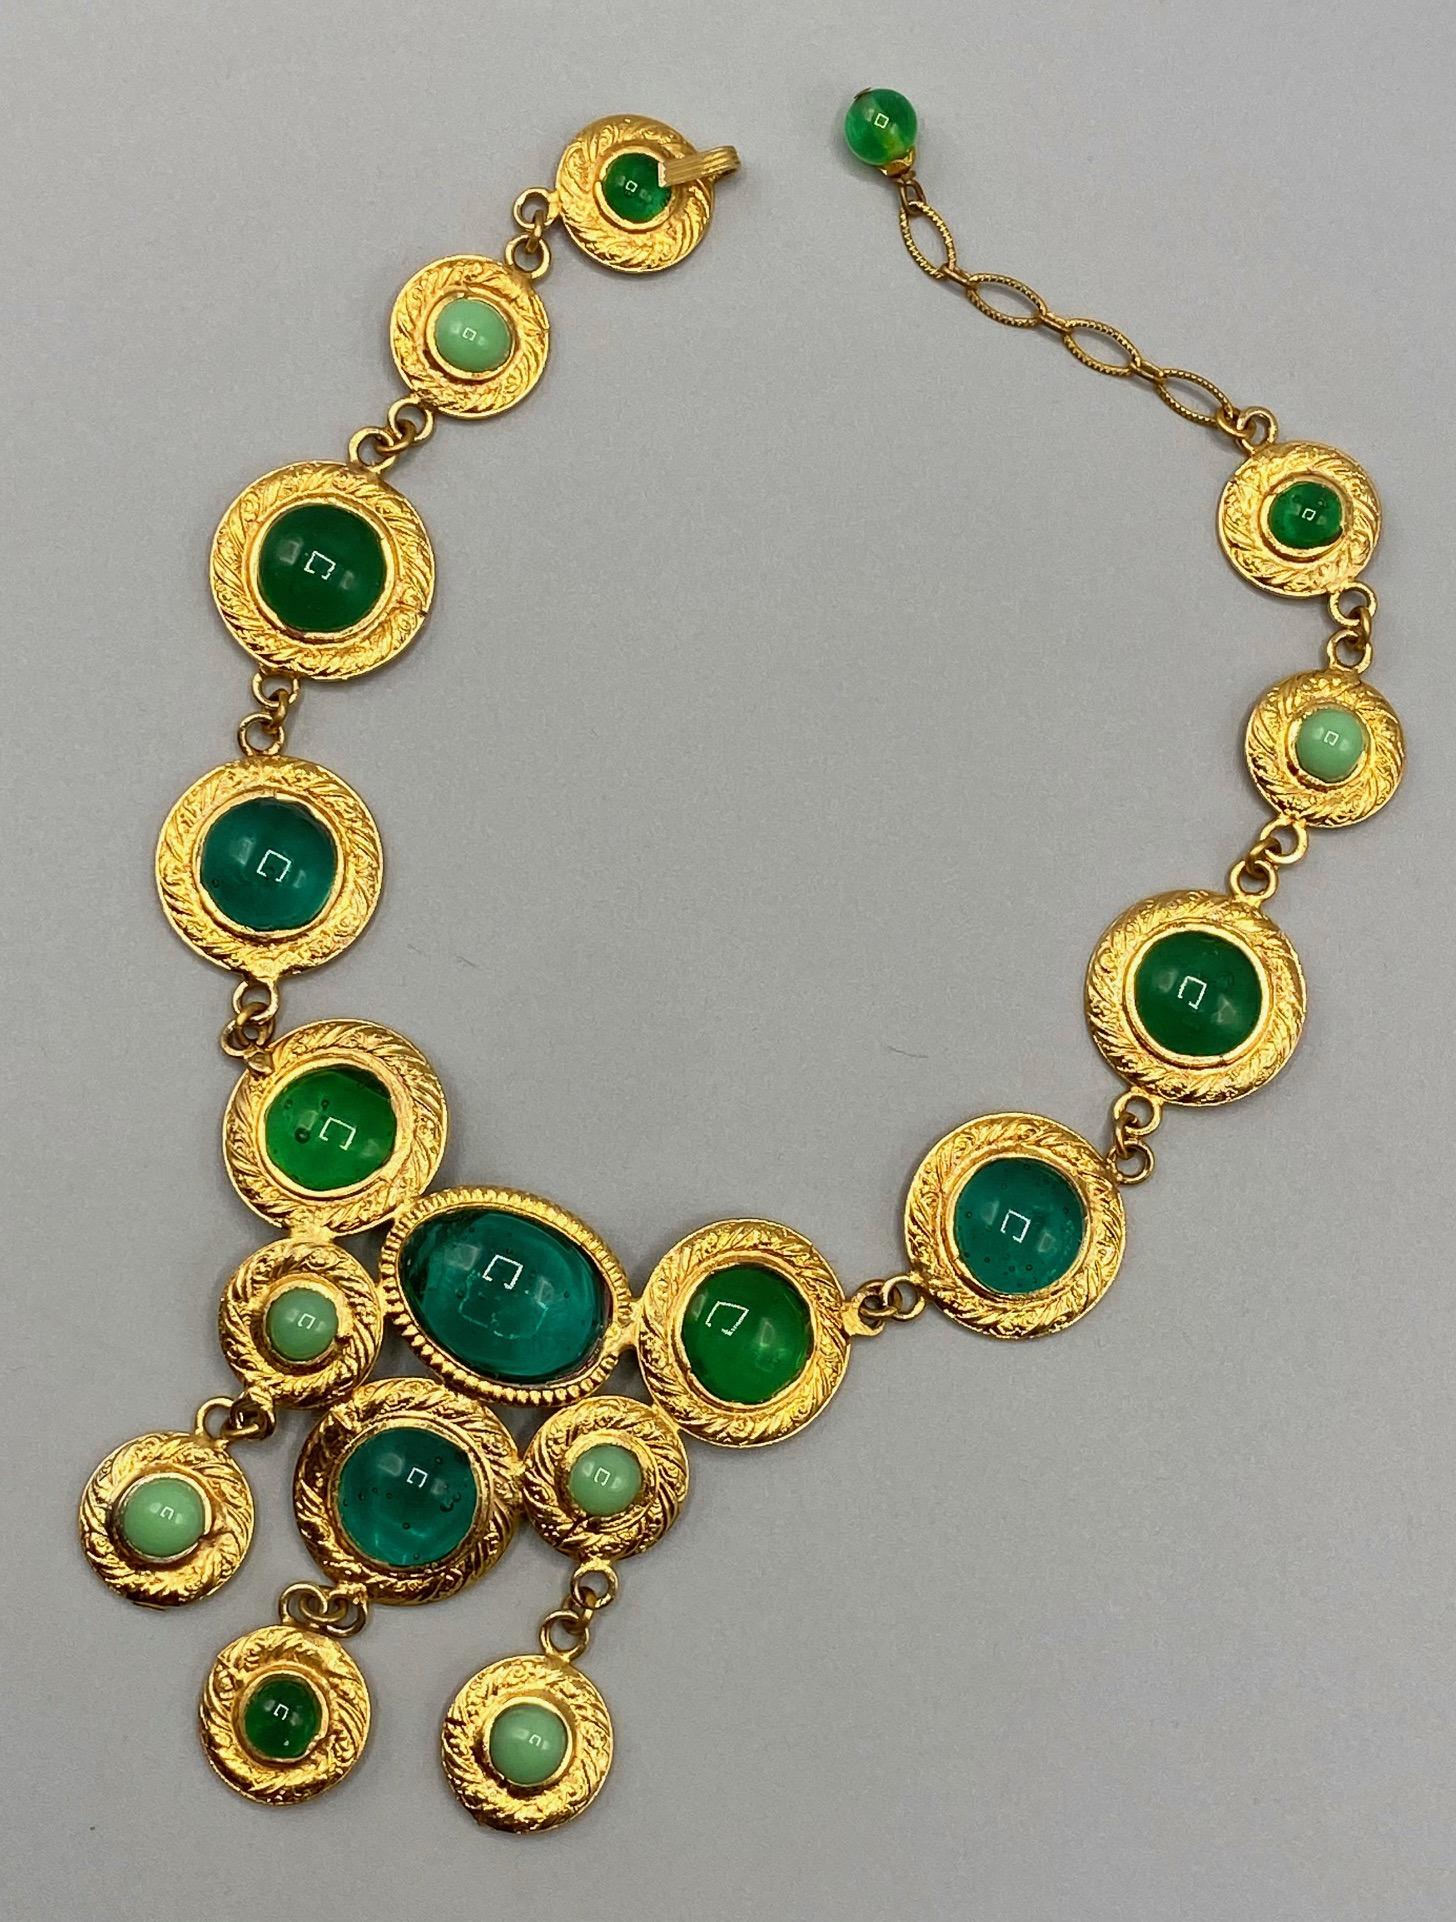 A wonderful gold tone necklace with teal, emerald green and light green poured glass bib necklace from France circa 1980. The necklace is comprised of round and oval textured gold disks with poured glass cabochons. The larger round disks are 1 inch